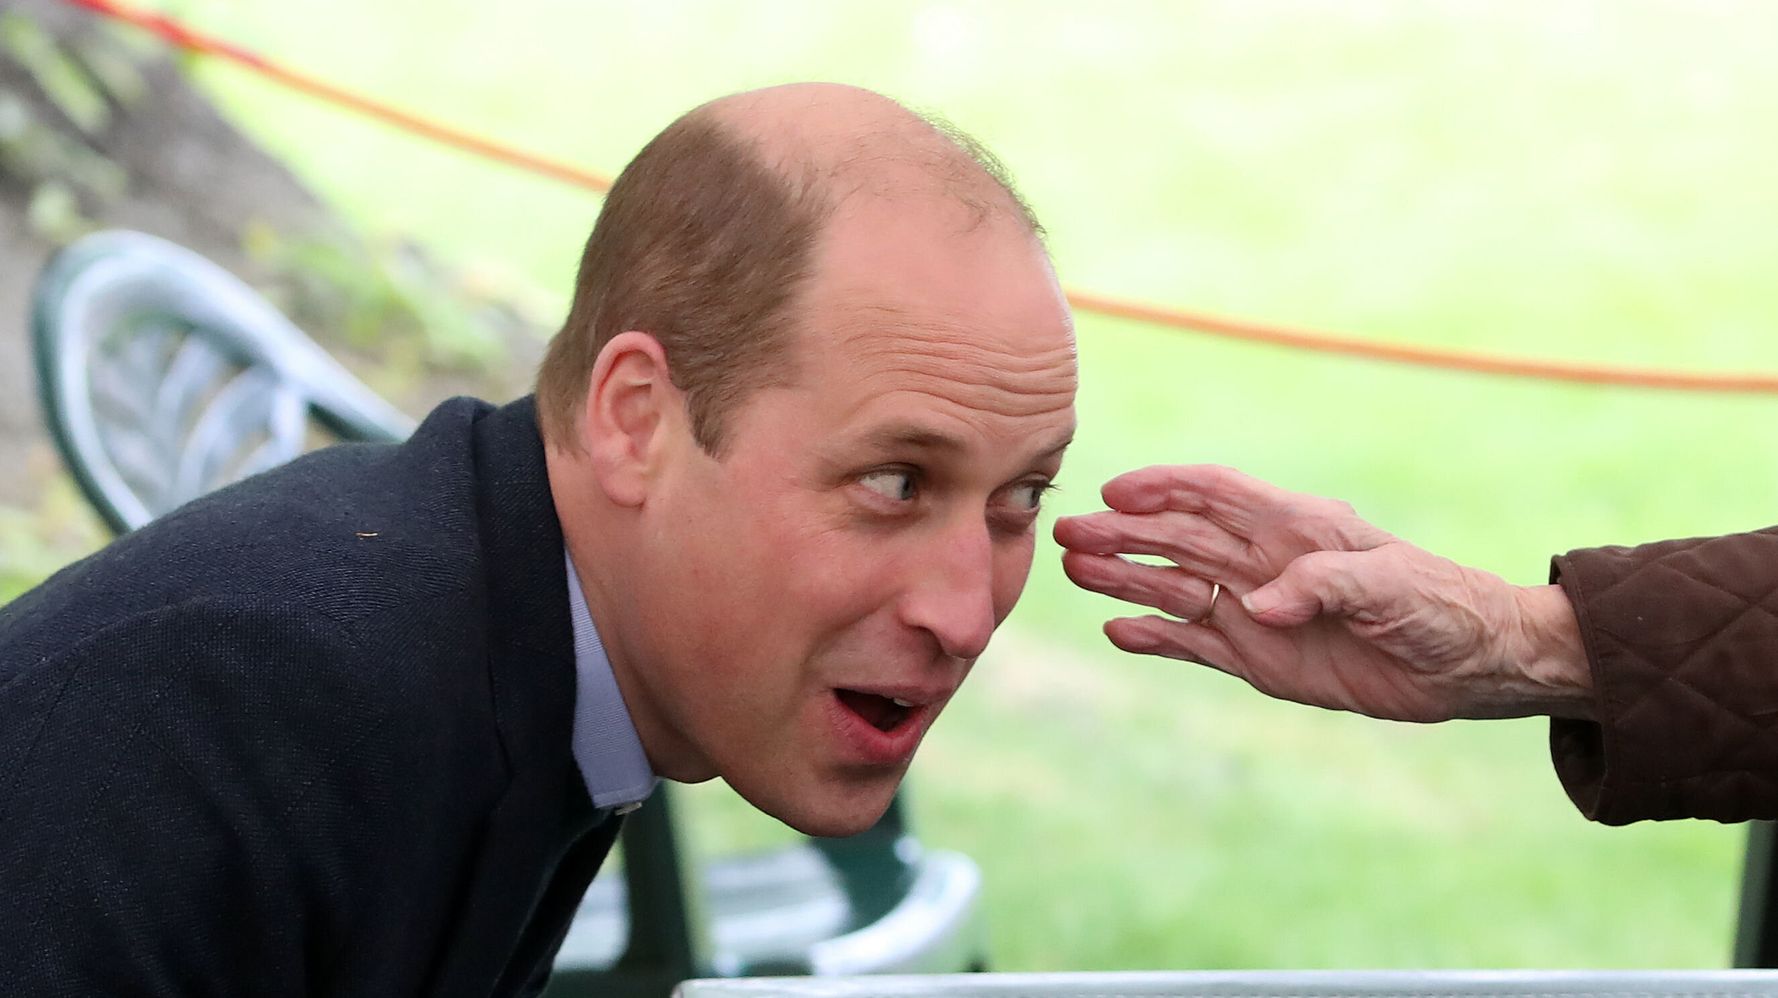 Prince William's Talk With 96-Year-Old Goes Viral: 'Not Sure Who's Flirting More'